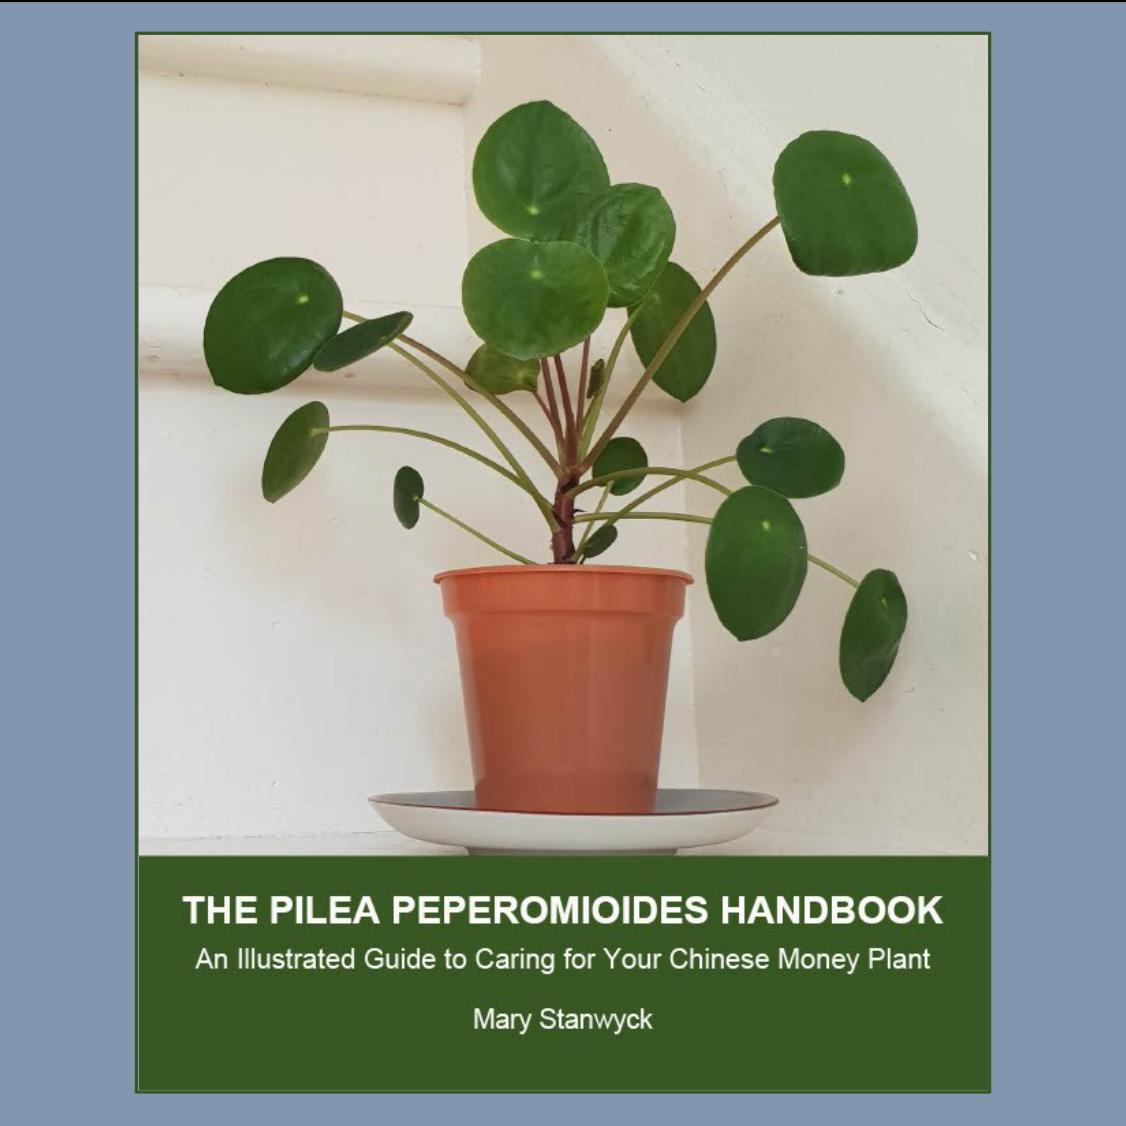 The Pilea Peperomioides Handbook: An Illustrated Guide to Caring for Your Chinese Money Plant by Mary Stanwyck – New Book Release Available Now